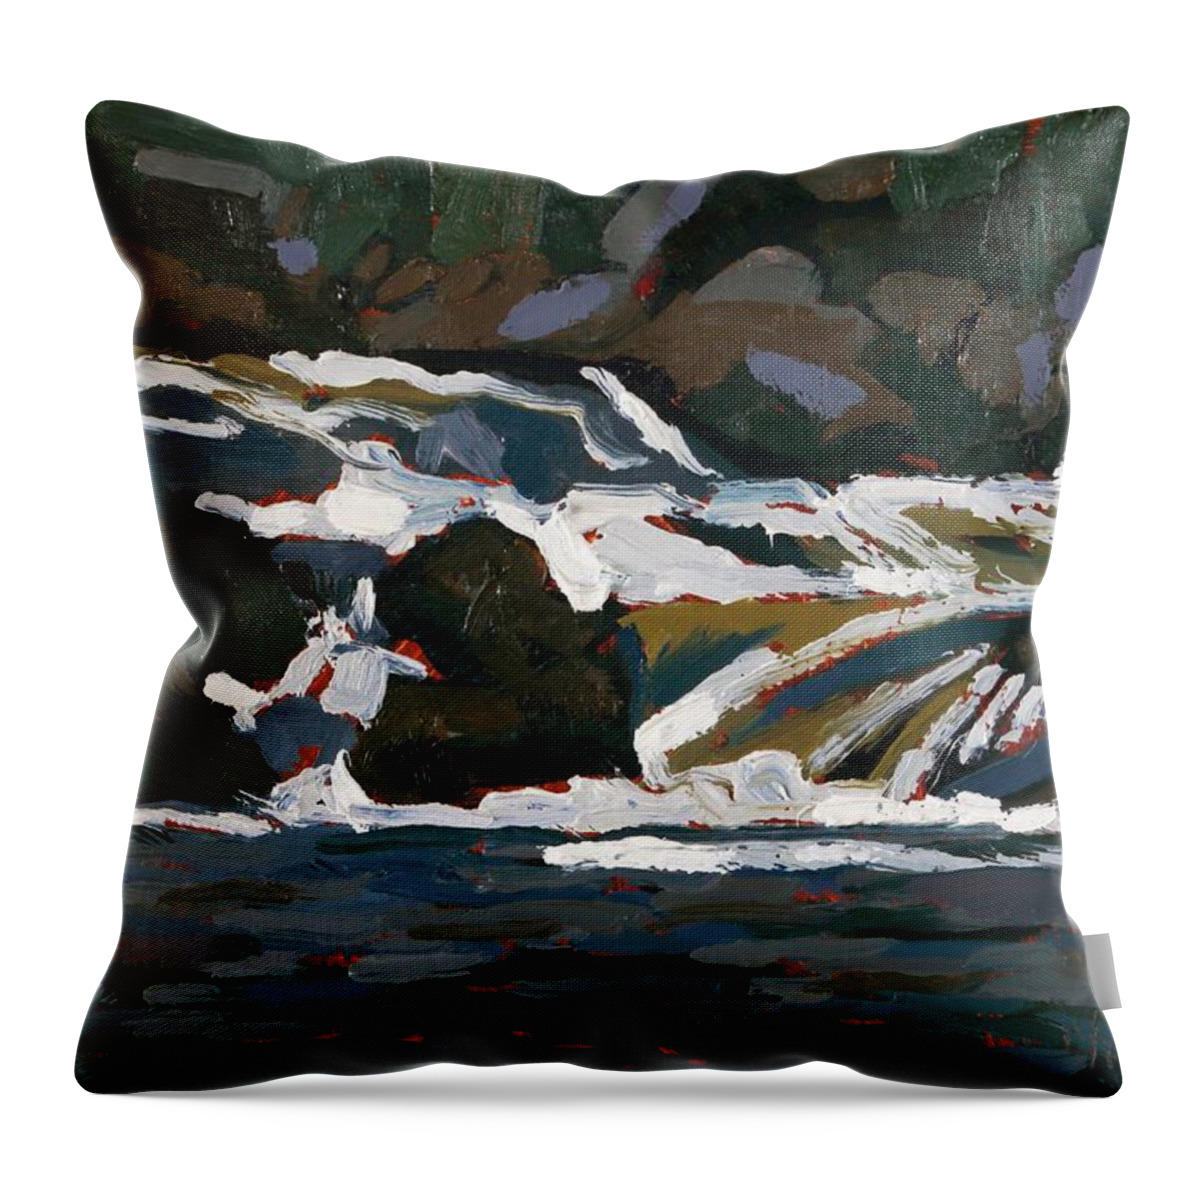 2150 Throw Pillow featuring the painting Grande Chute Ledge Torrent by Phil Chadwick